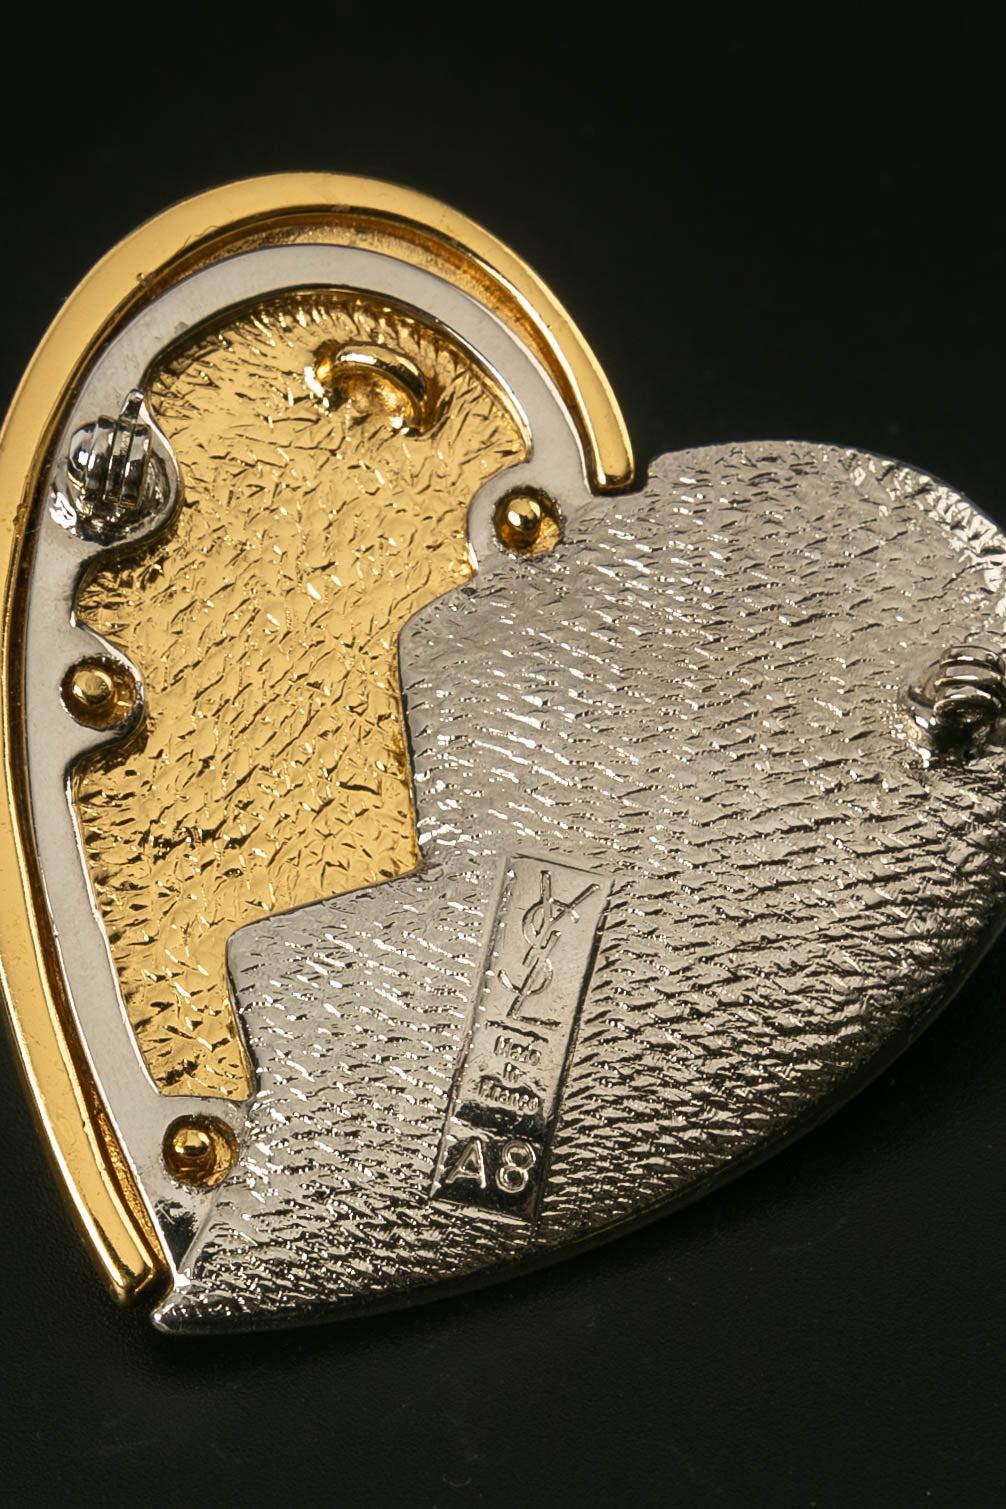 Yves Saint Laurent Heart Shaped Brooch/Pendant in Gold and Silver Metal Paved For Sale 1